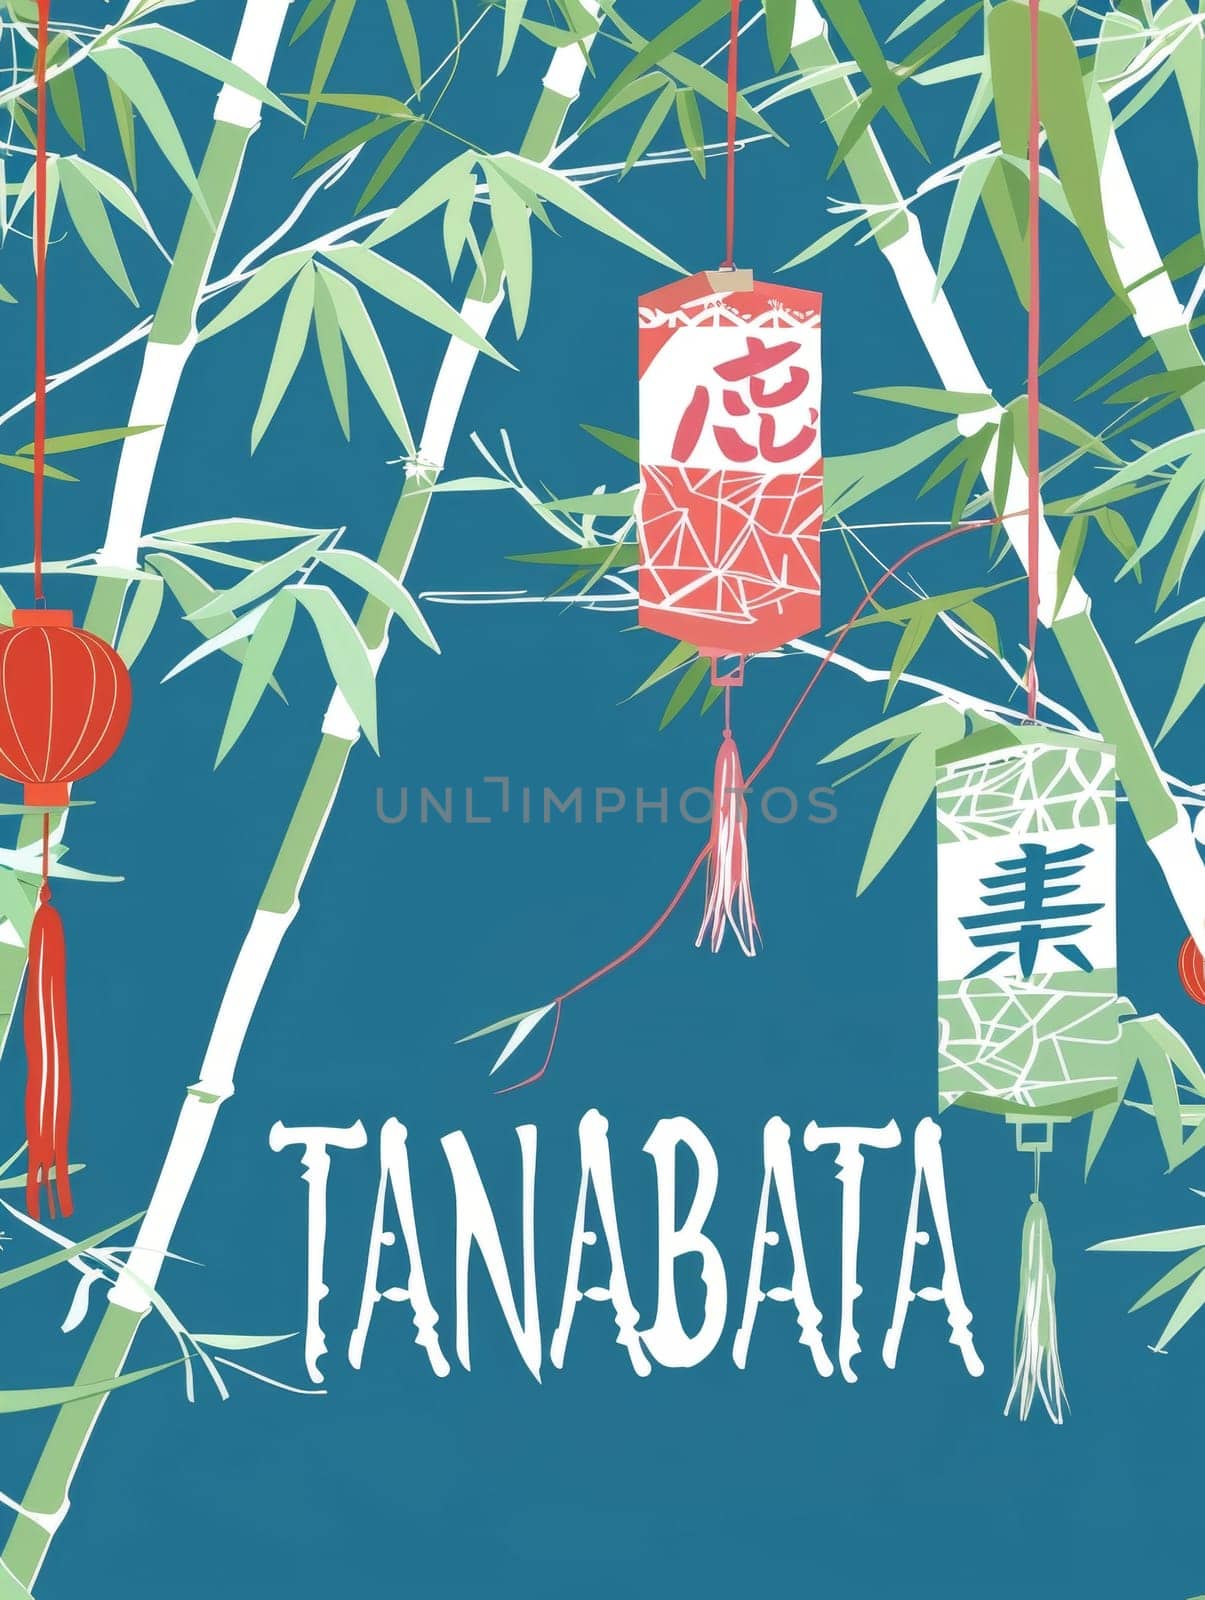 Artistic representation of Tanabata with Japanese kanji on hanging lanterns, surrounded by bamboo leaves against a night sky